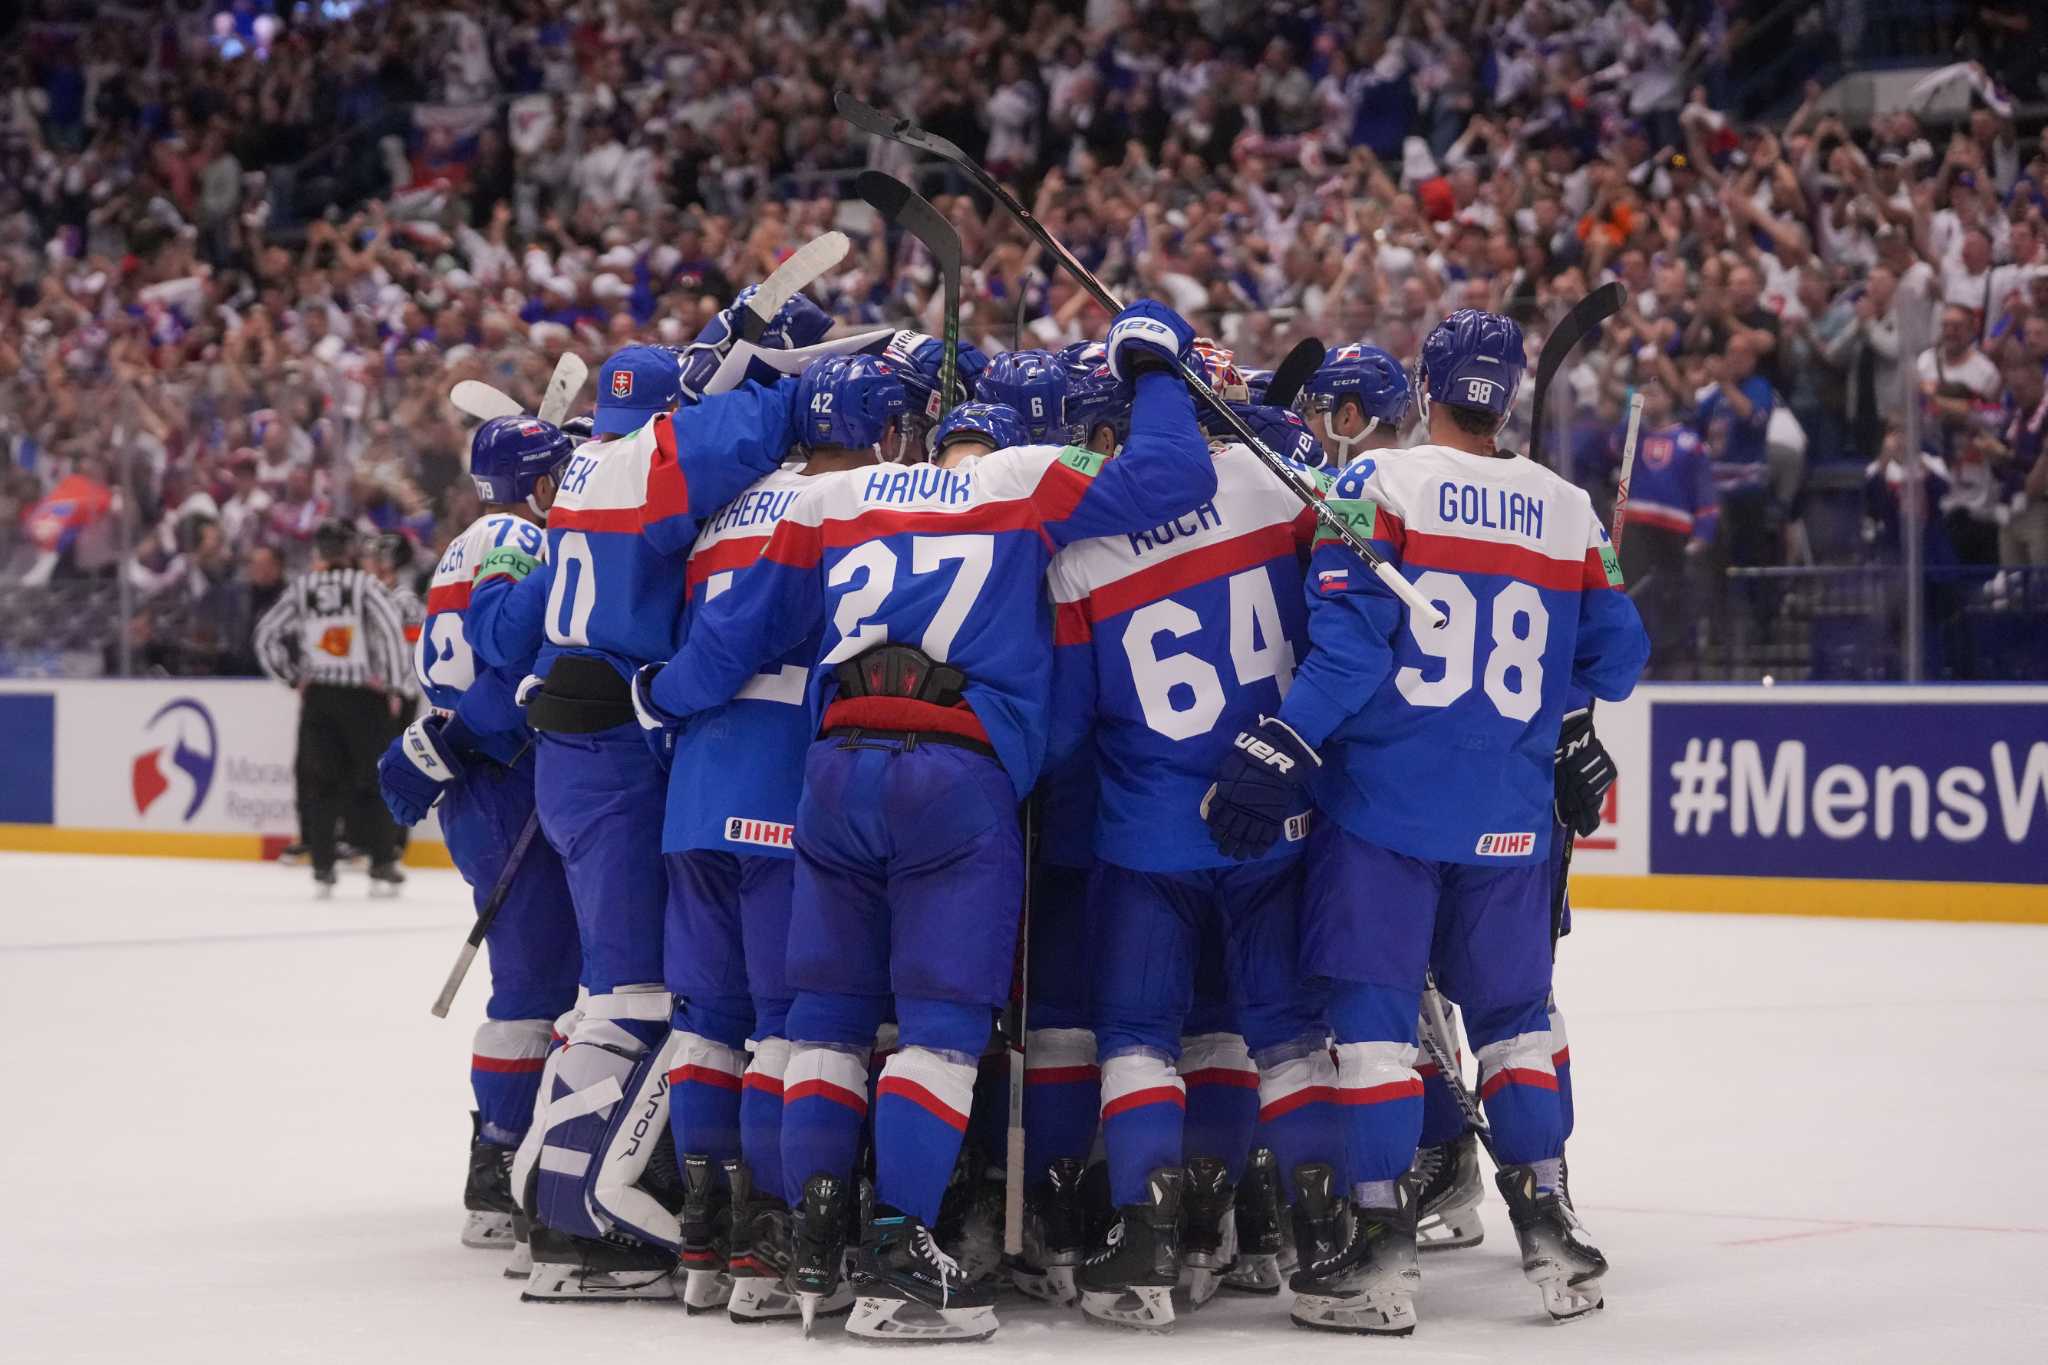 Slovakia upsets the US in OT at ice hockey worlds and Finland eases past Norway